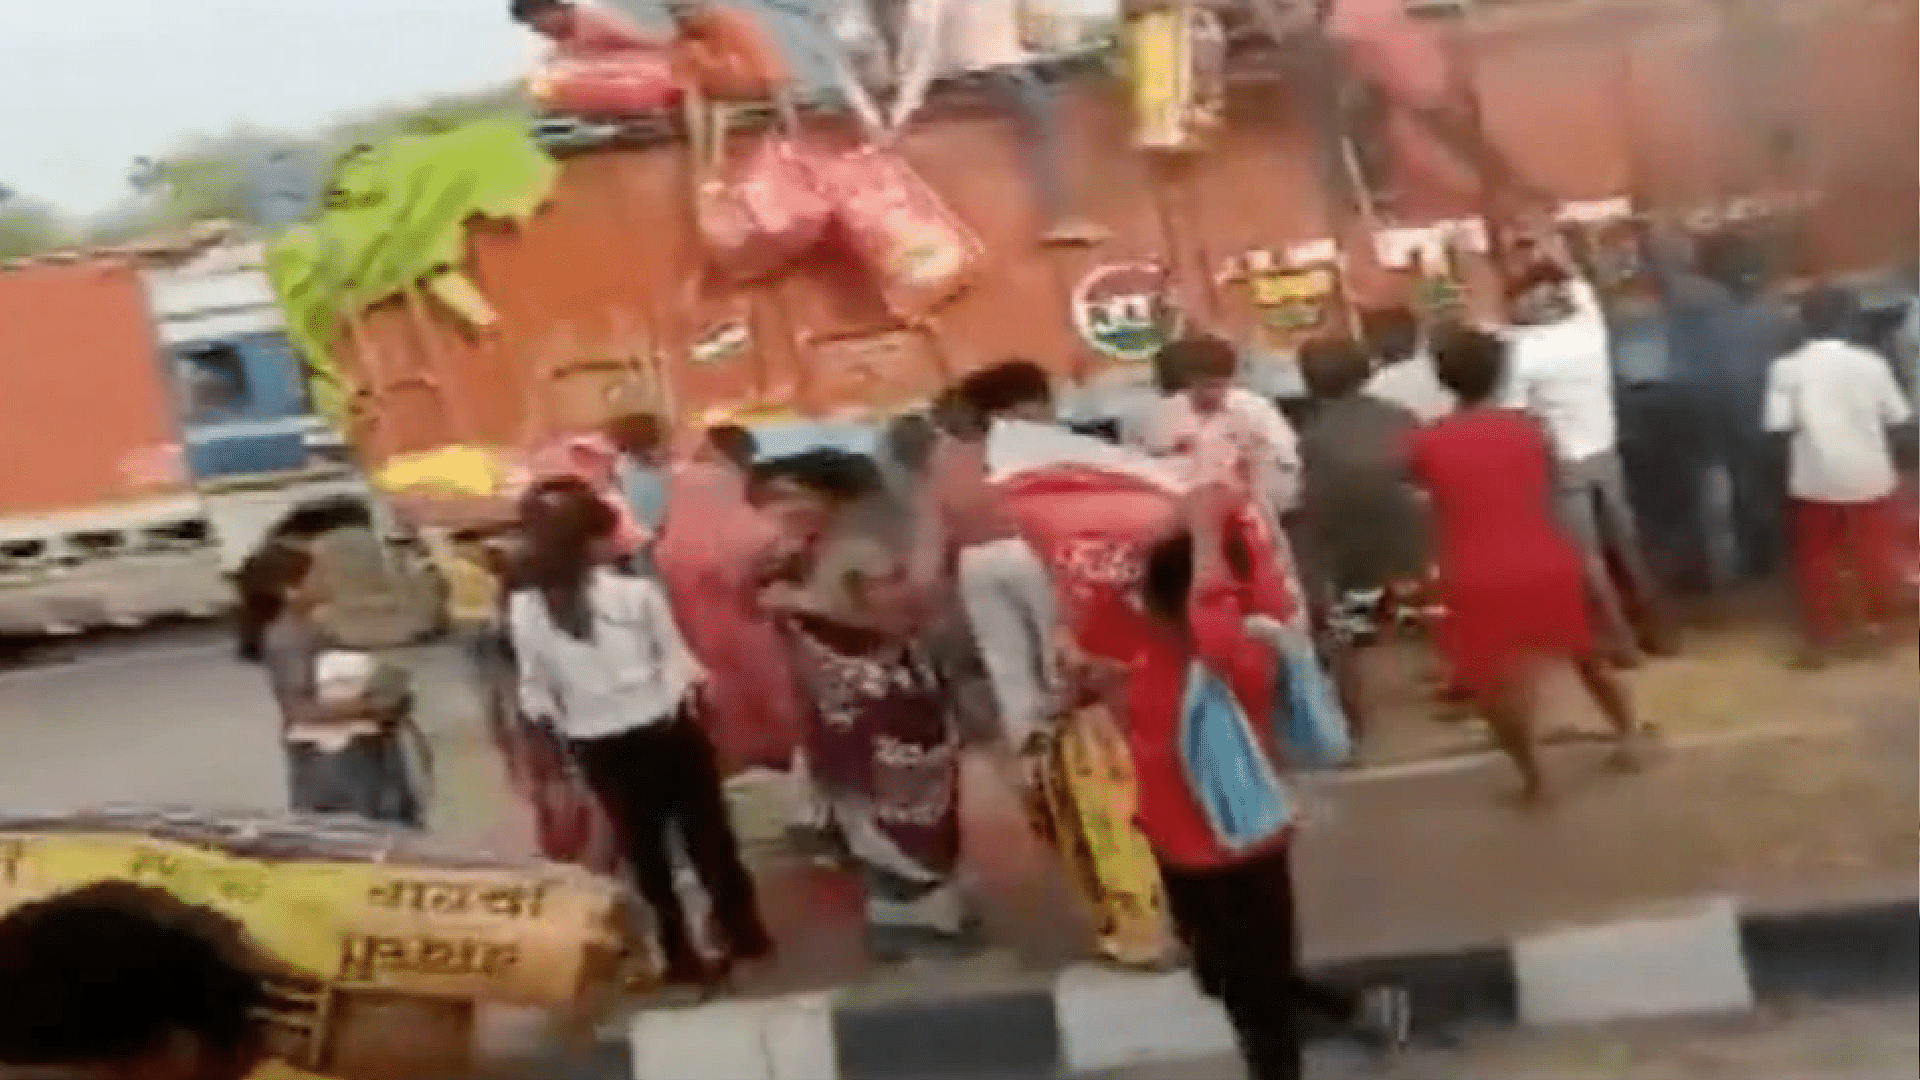 truck accident video people started looting gram bags as truck got accident